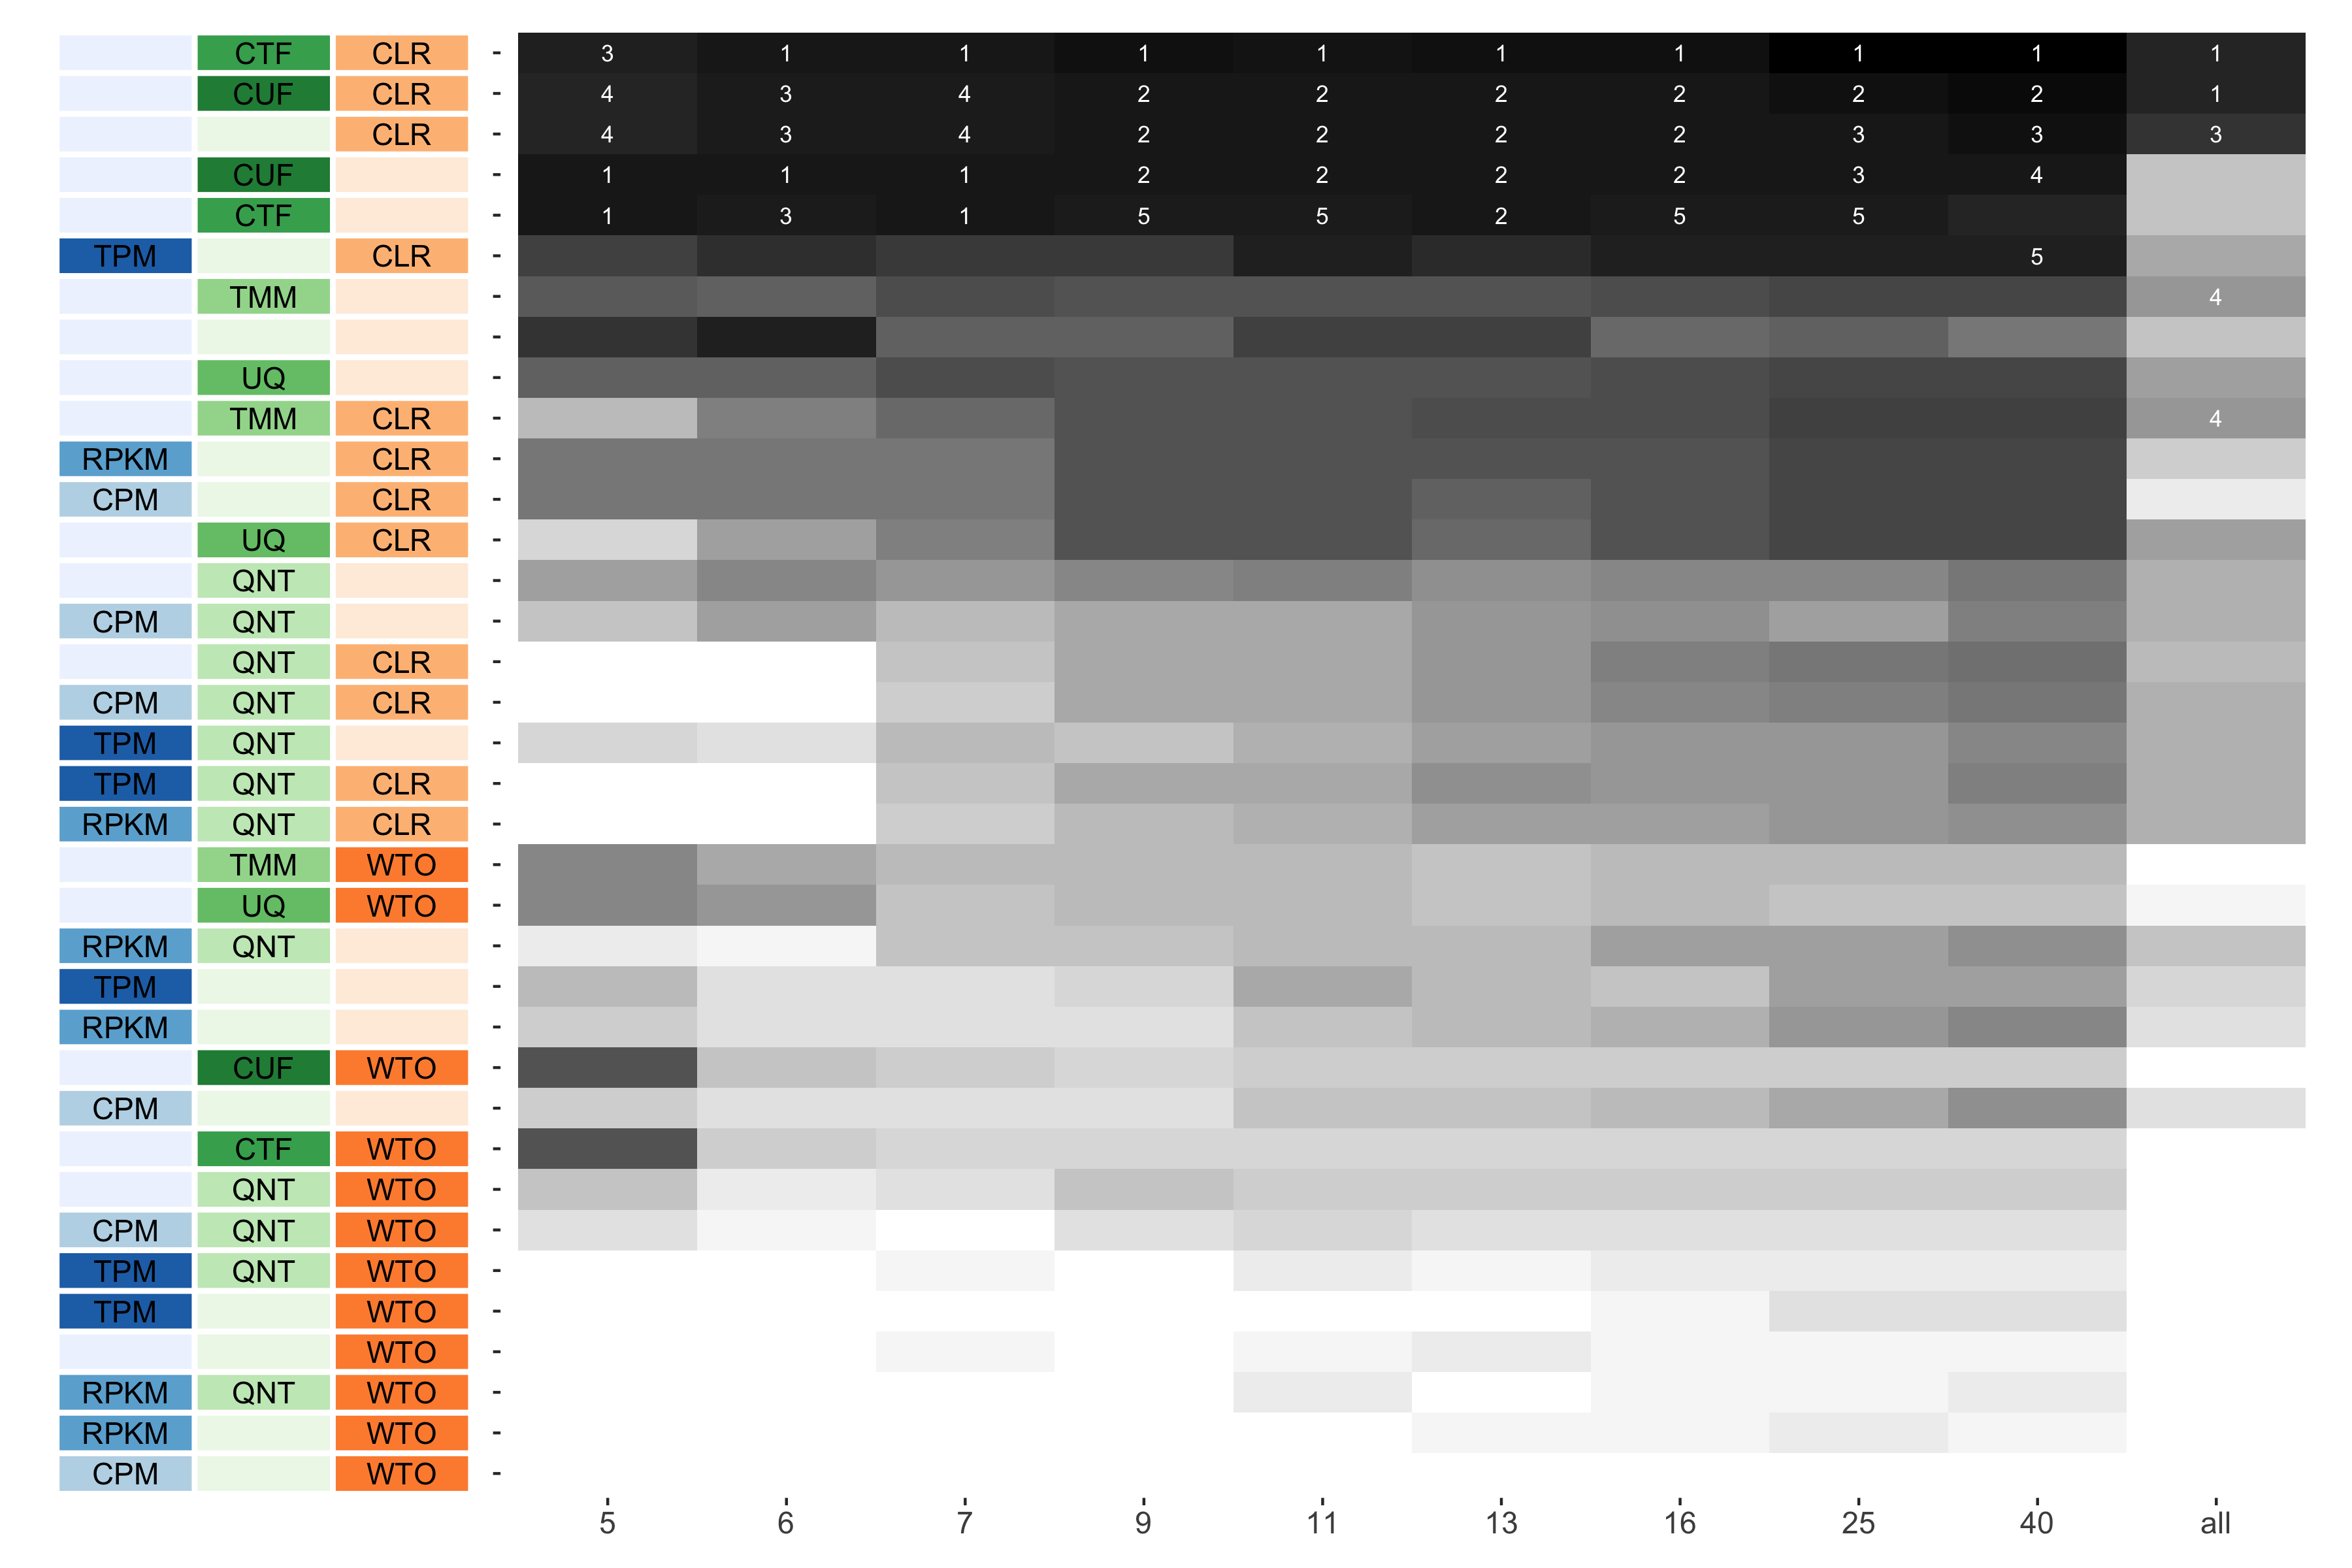 The heatmap shows the number of times (cell color) each workflow (row) outperforms other workflows as sample size varies (columns), when the resulting coexpression networks are evaluated based on the tissue-aware gold standard. The darkest colors indicate workflows that are significantly better than the most other workflows. In addition, the top 5 workflows in each column are marked with their rank, with ties given minimum rank.